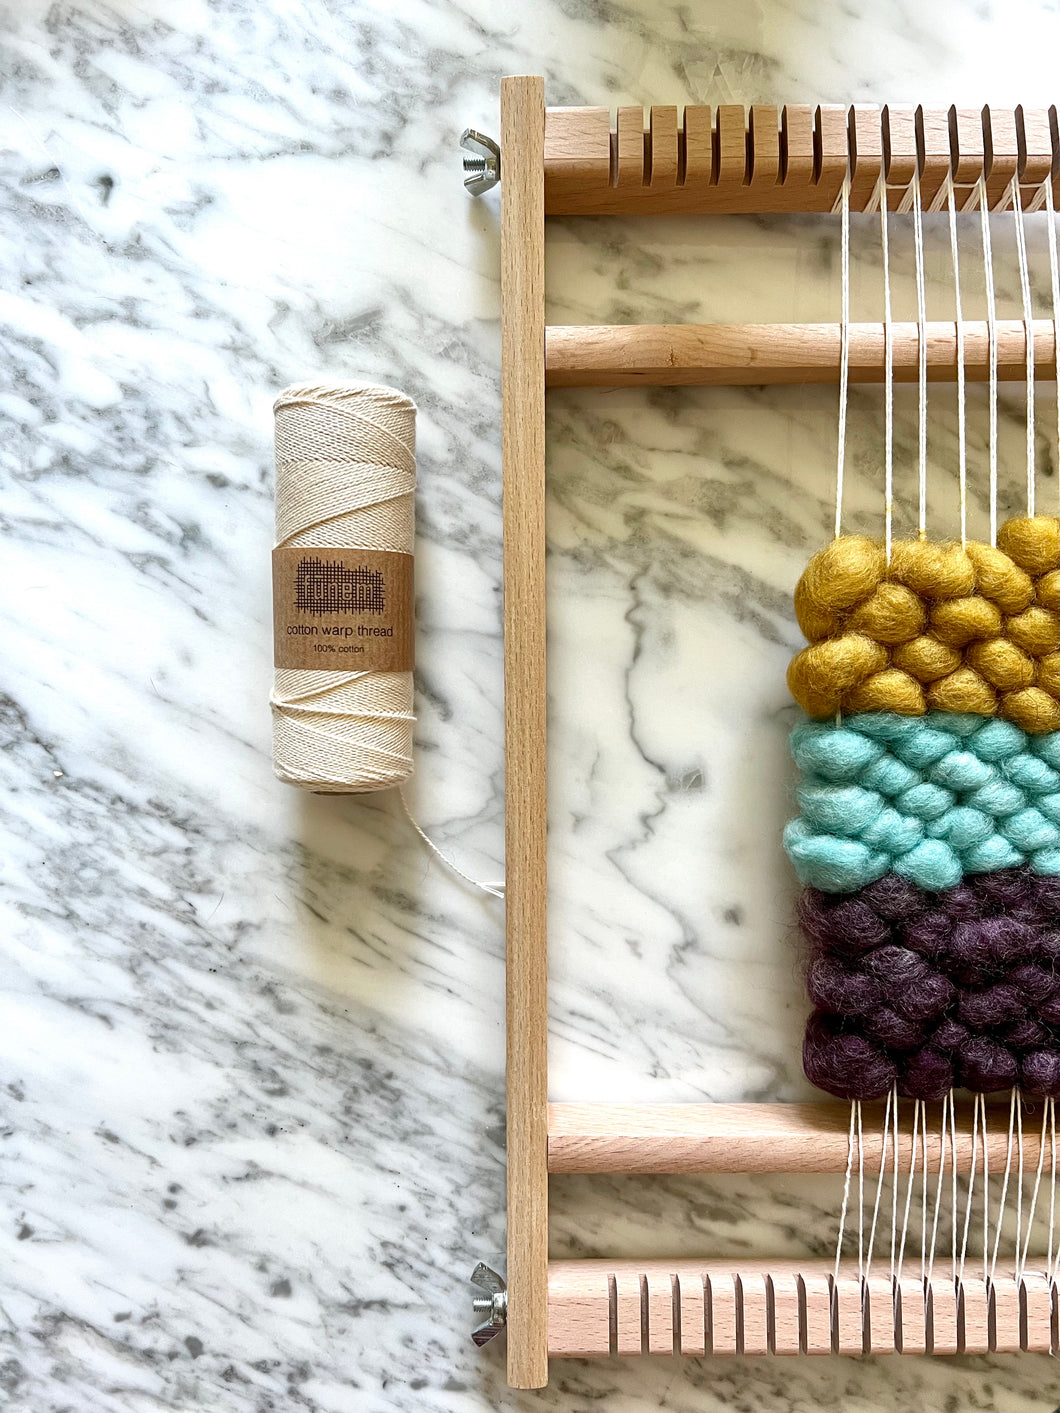 A roll of white cotton warp thread lies on a marble tabletop next to a small wood tapestry handheld loom, warped in the same cotton thread, with wefts of yellow, aqua and purple core rug yarn.